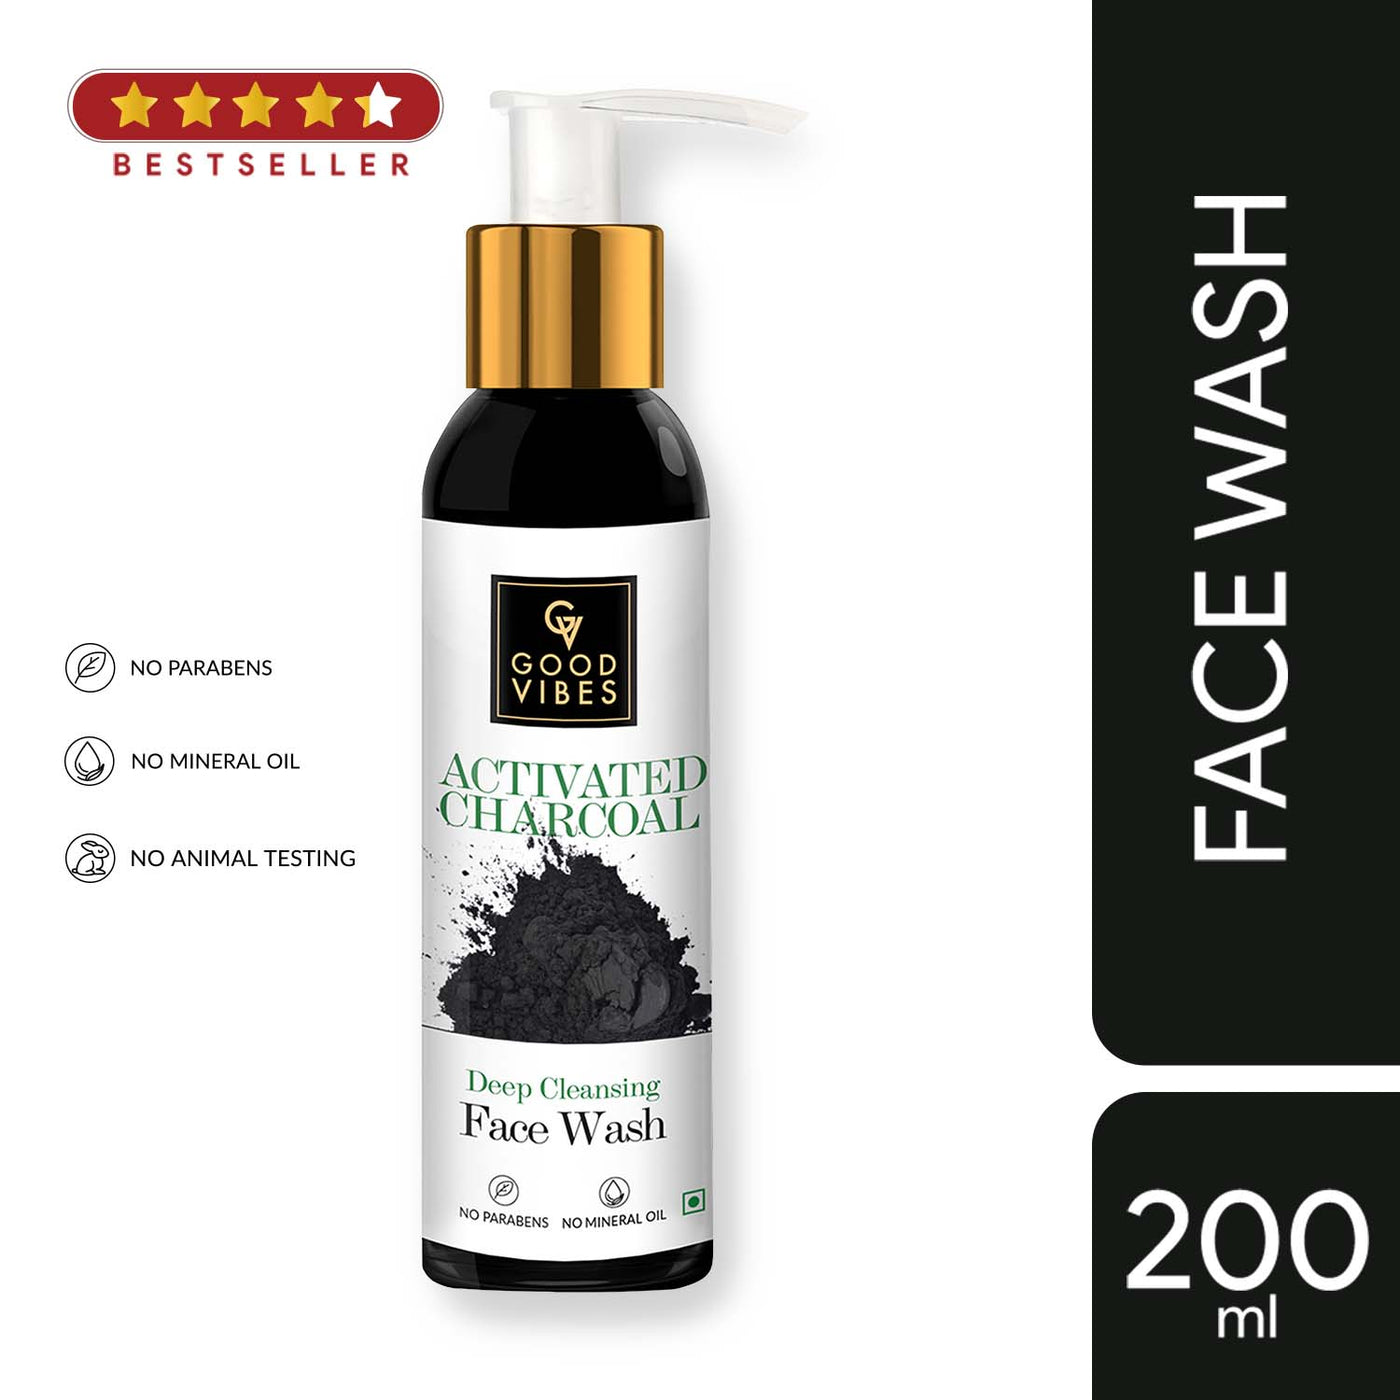 good-vibes-deep-cleansing-face-wash-activated-charcoal-200-ml-1-17-3